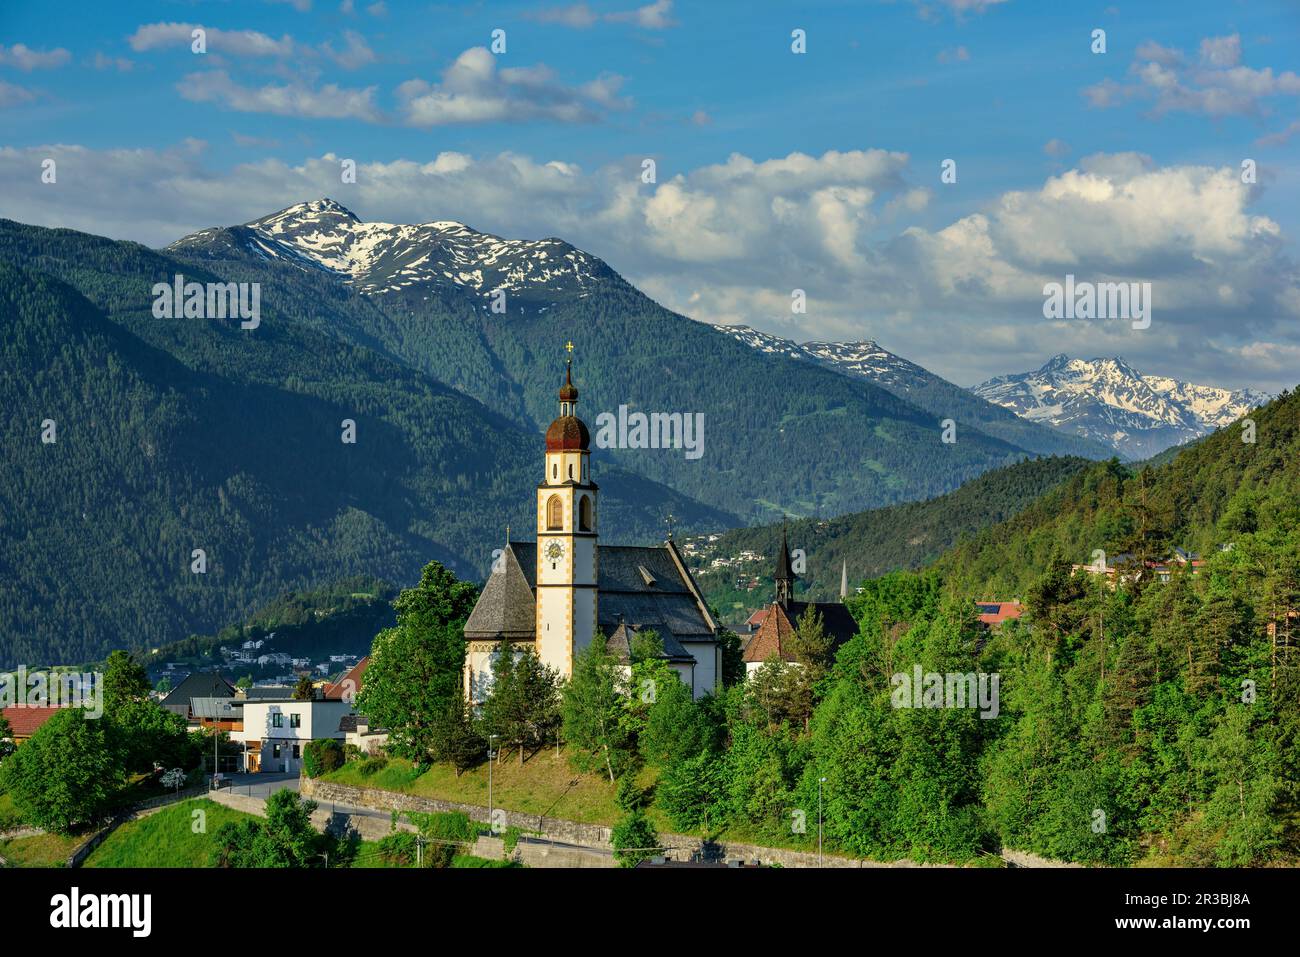 Austria, Tyrol, Tarrenz, Mountain village in summer with church in foreground Stock Photo